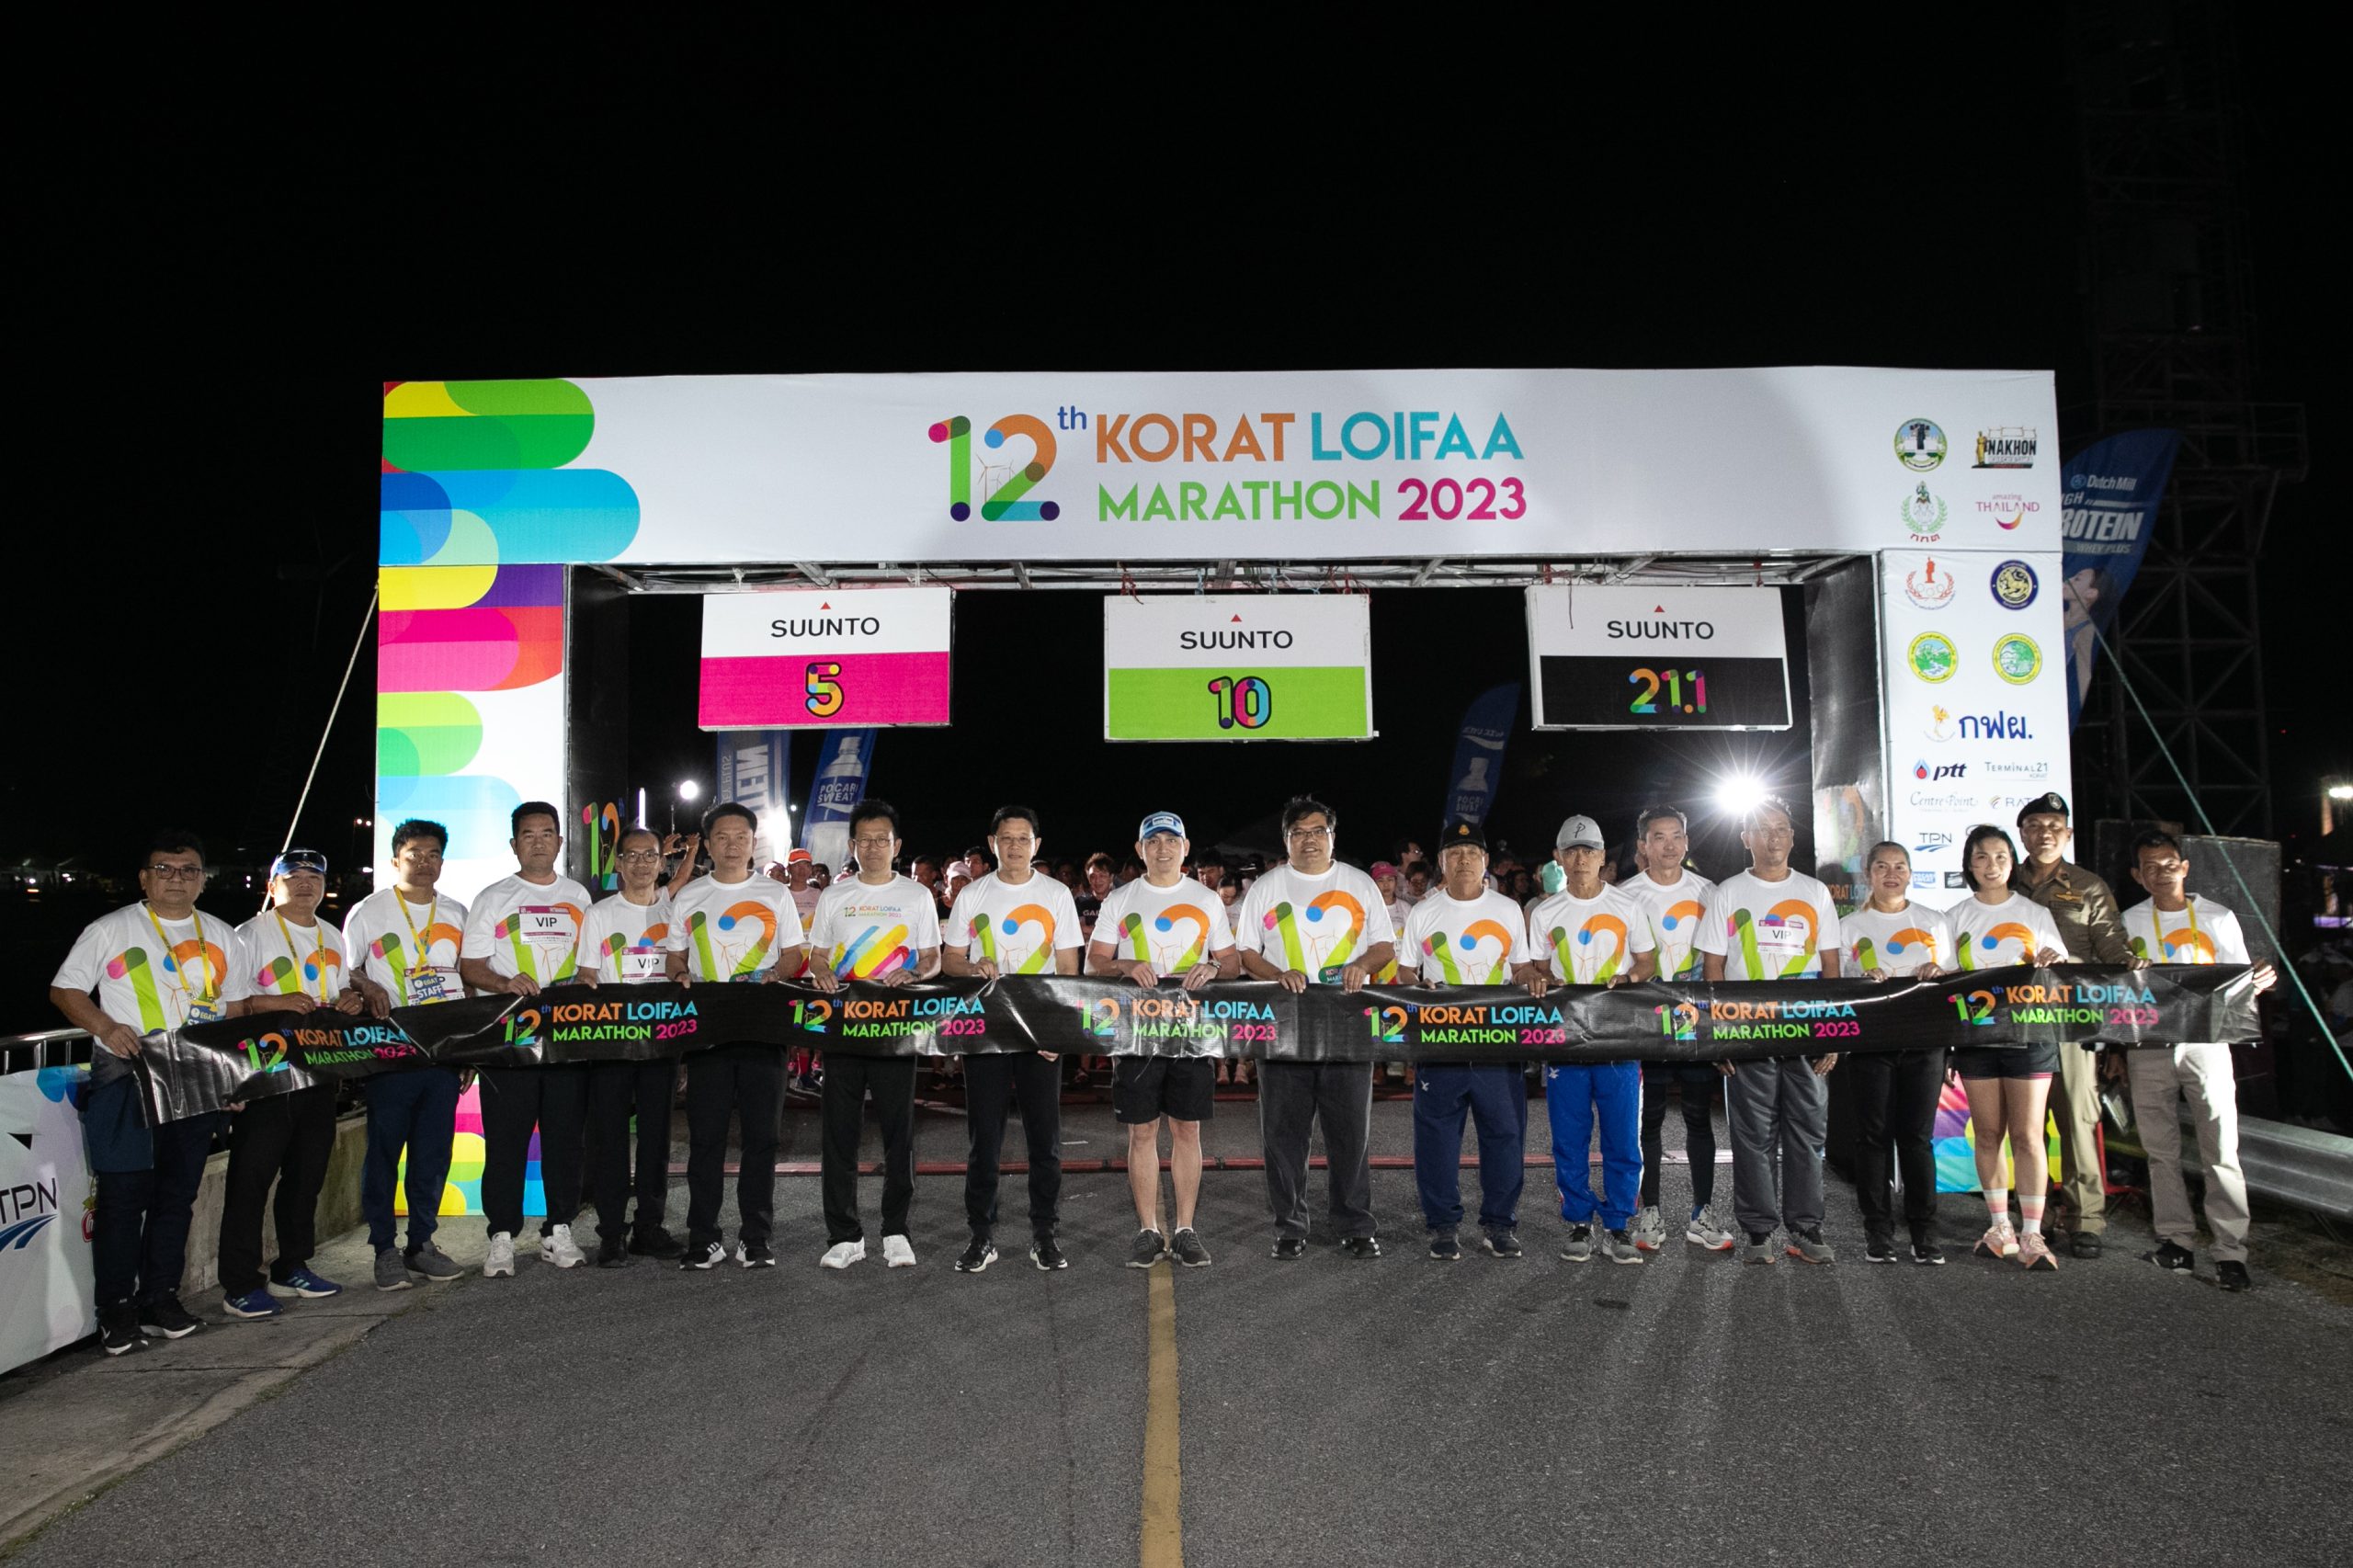 Thousands of runners join “12th Korat Loifaa Marathon” amidst cool breeze and scenic view of Lamtakong Jolabha Vadhana Power Plant’s reservoir